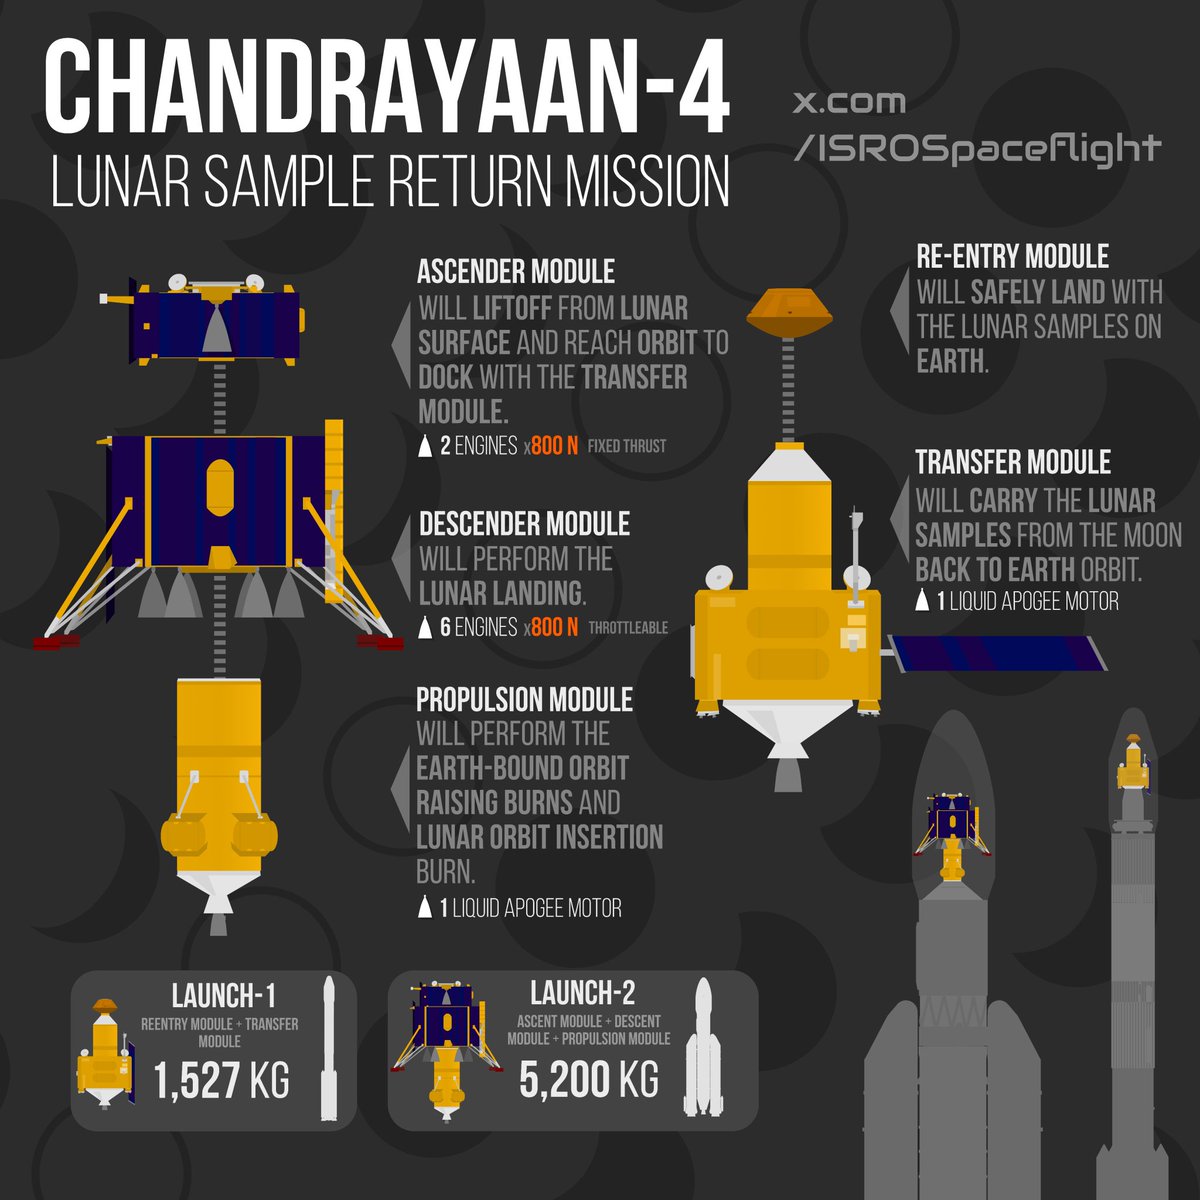 #ISRO is now targeting 2026 for the launch of the Chandrayaan-4 Lunar Sample Return Mission!! 🎯

Previously it was planned to launch NET 2027.

Here's hoping they'll successfully demonstrate docking capability via SpaDEx in late-2024 as it'll play a pivotal role in CH-4.